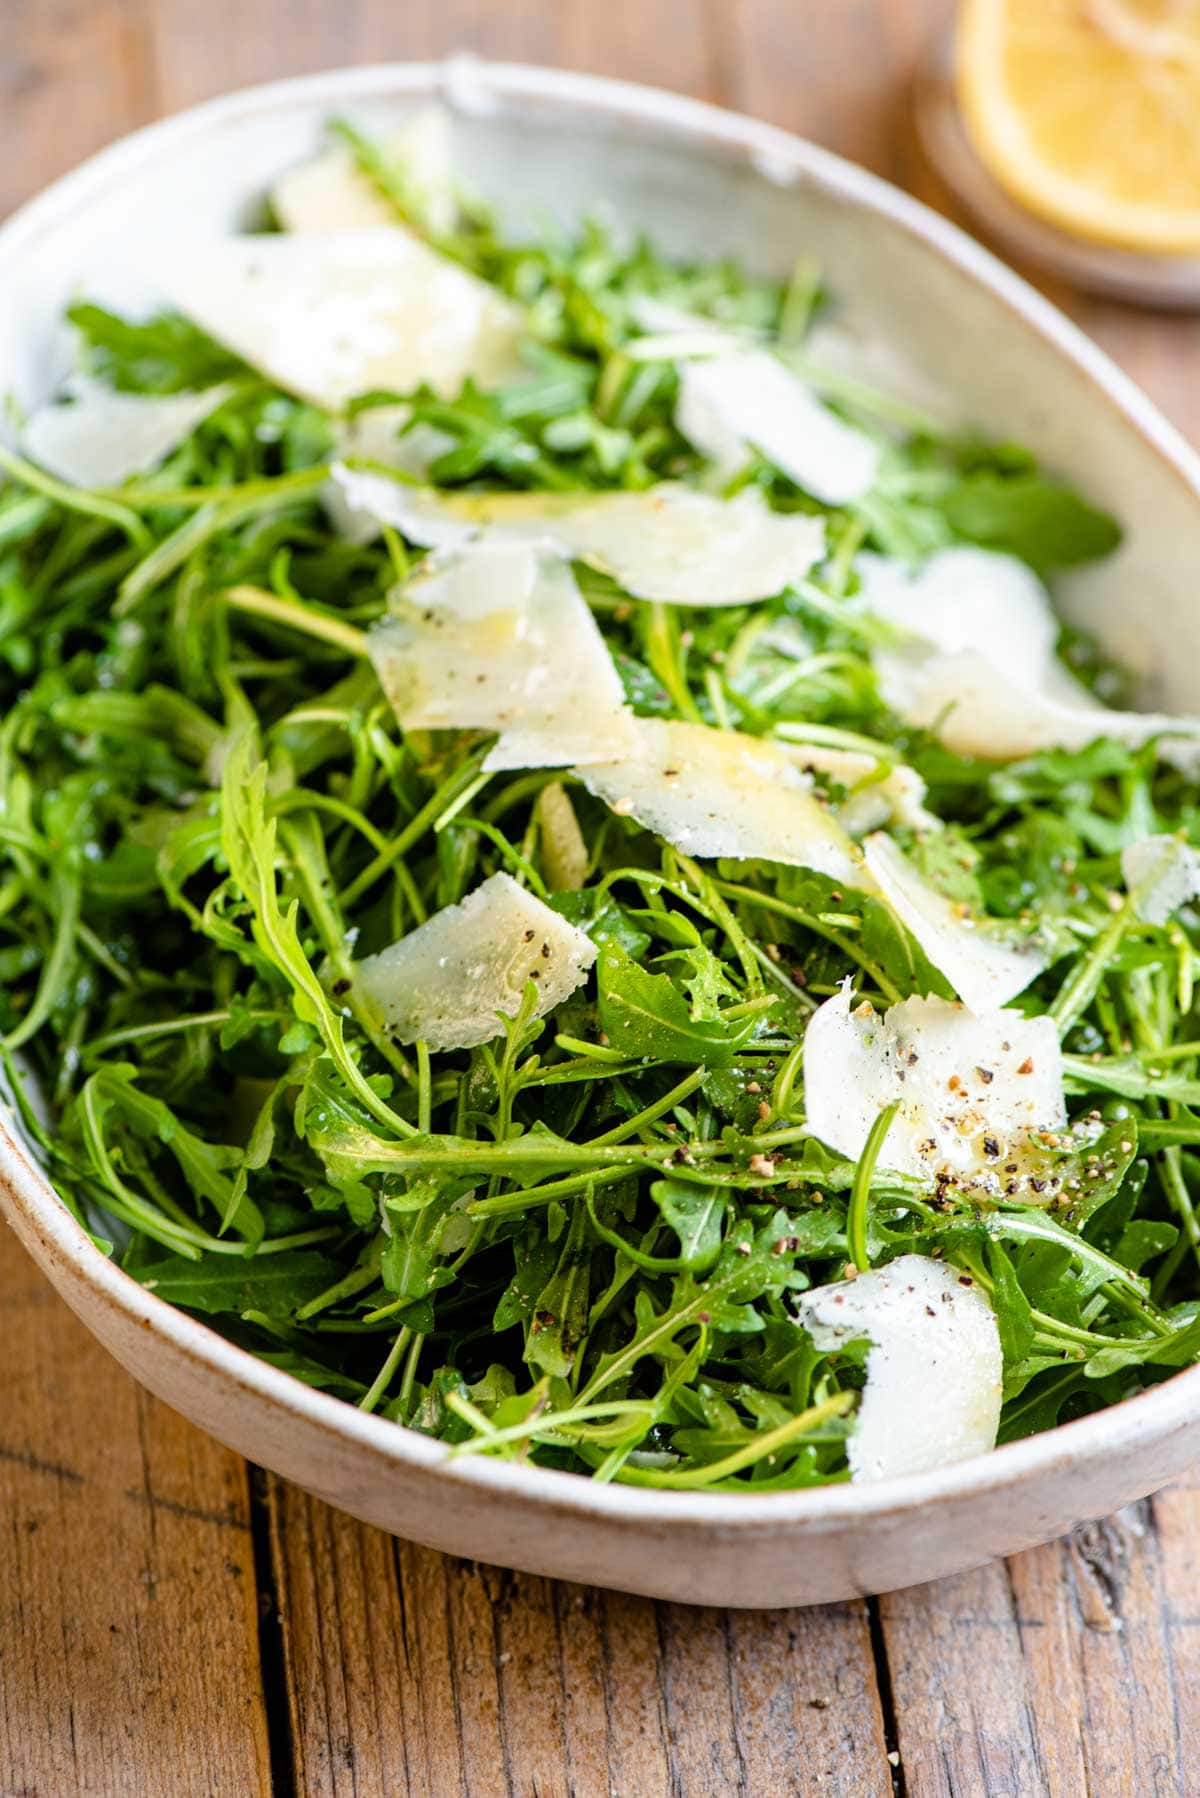 A close up of an arugula salad in a bowl